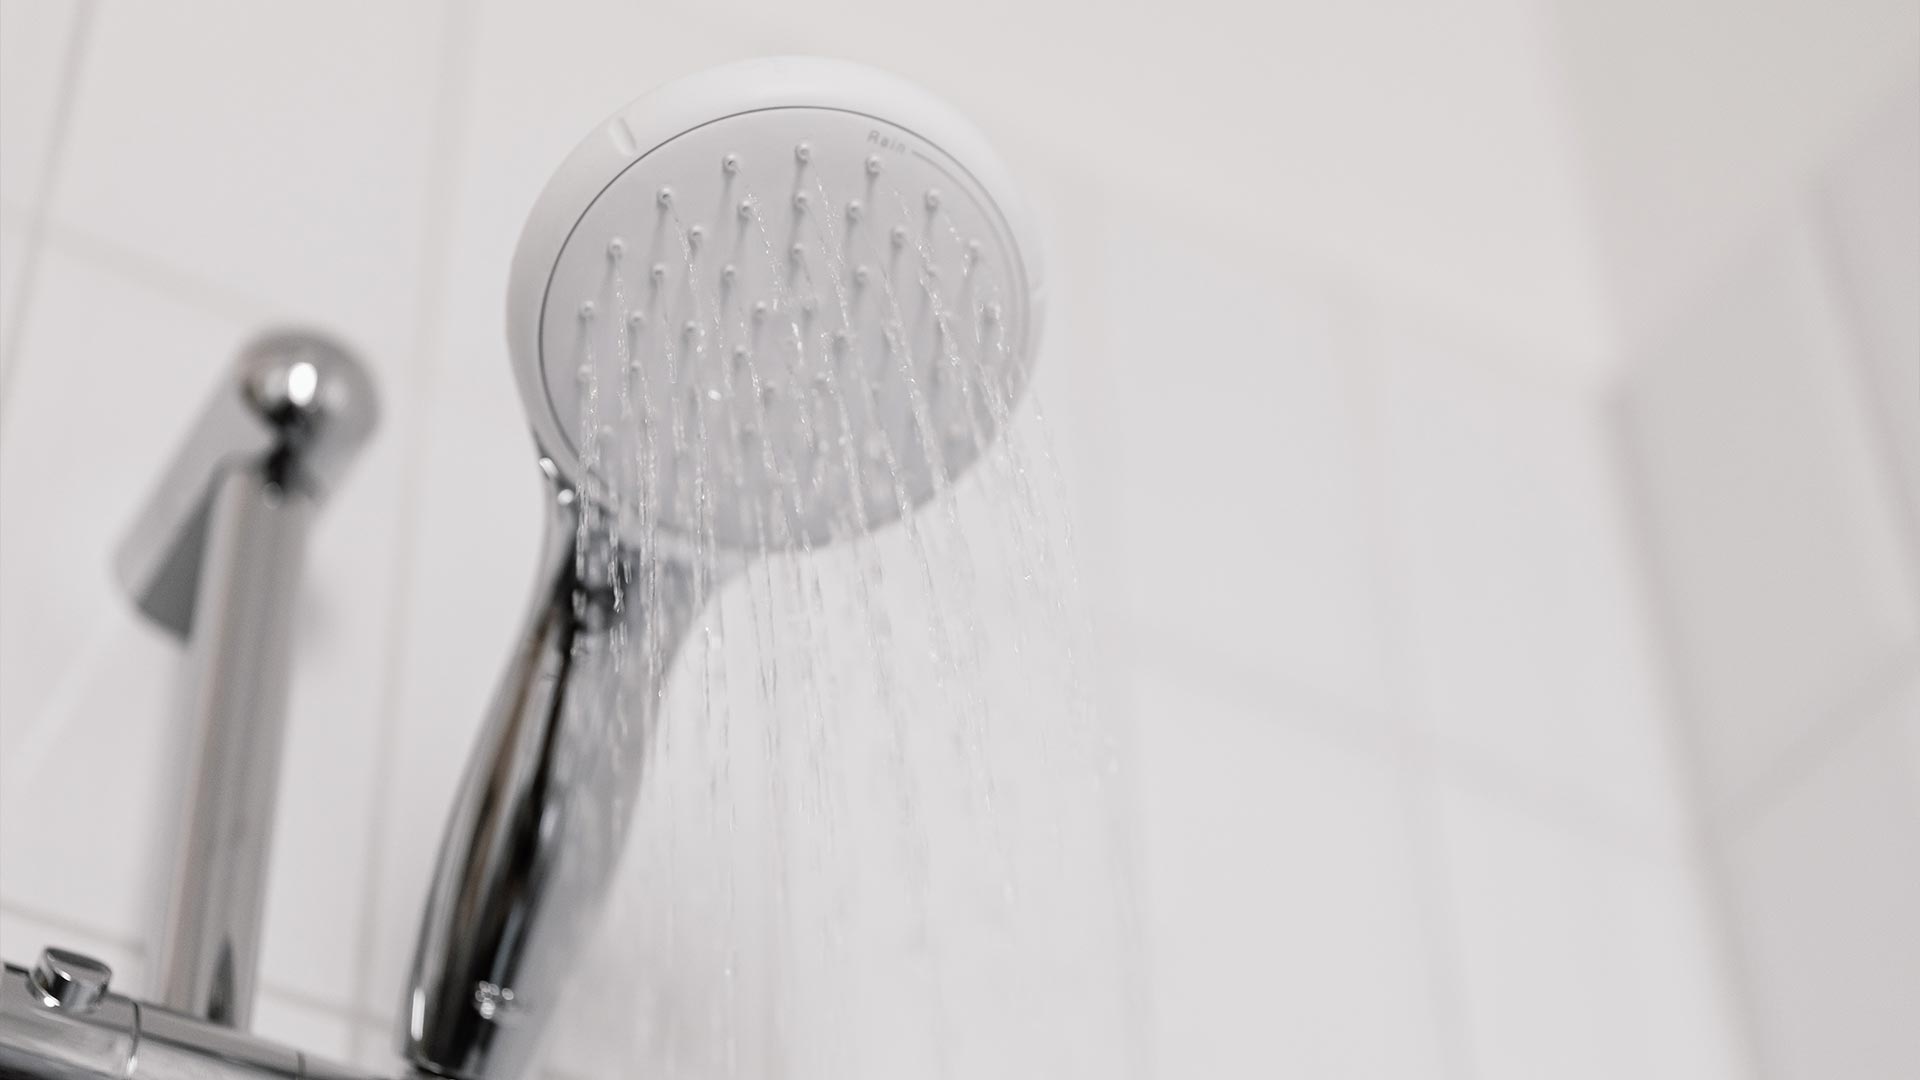 566-065 9.1 -- How Showers Help with Mental Health